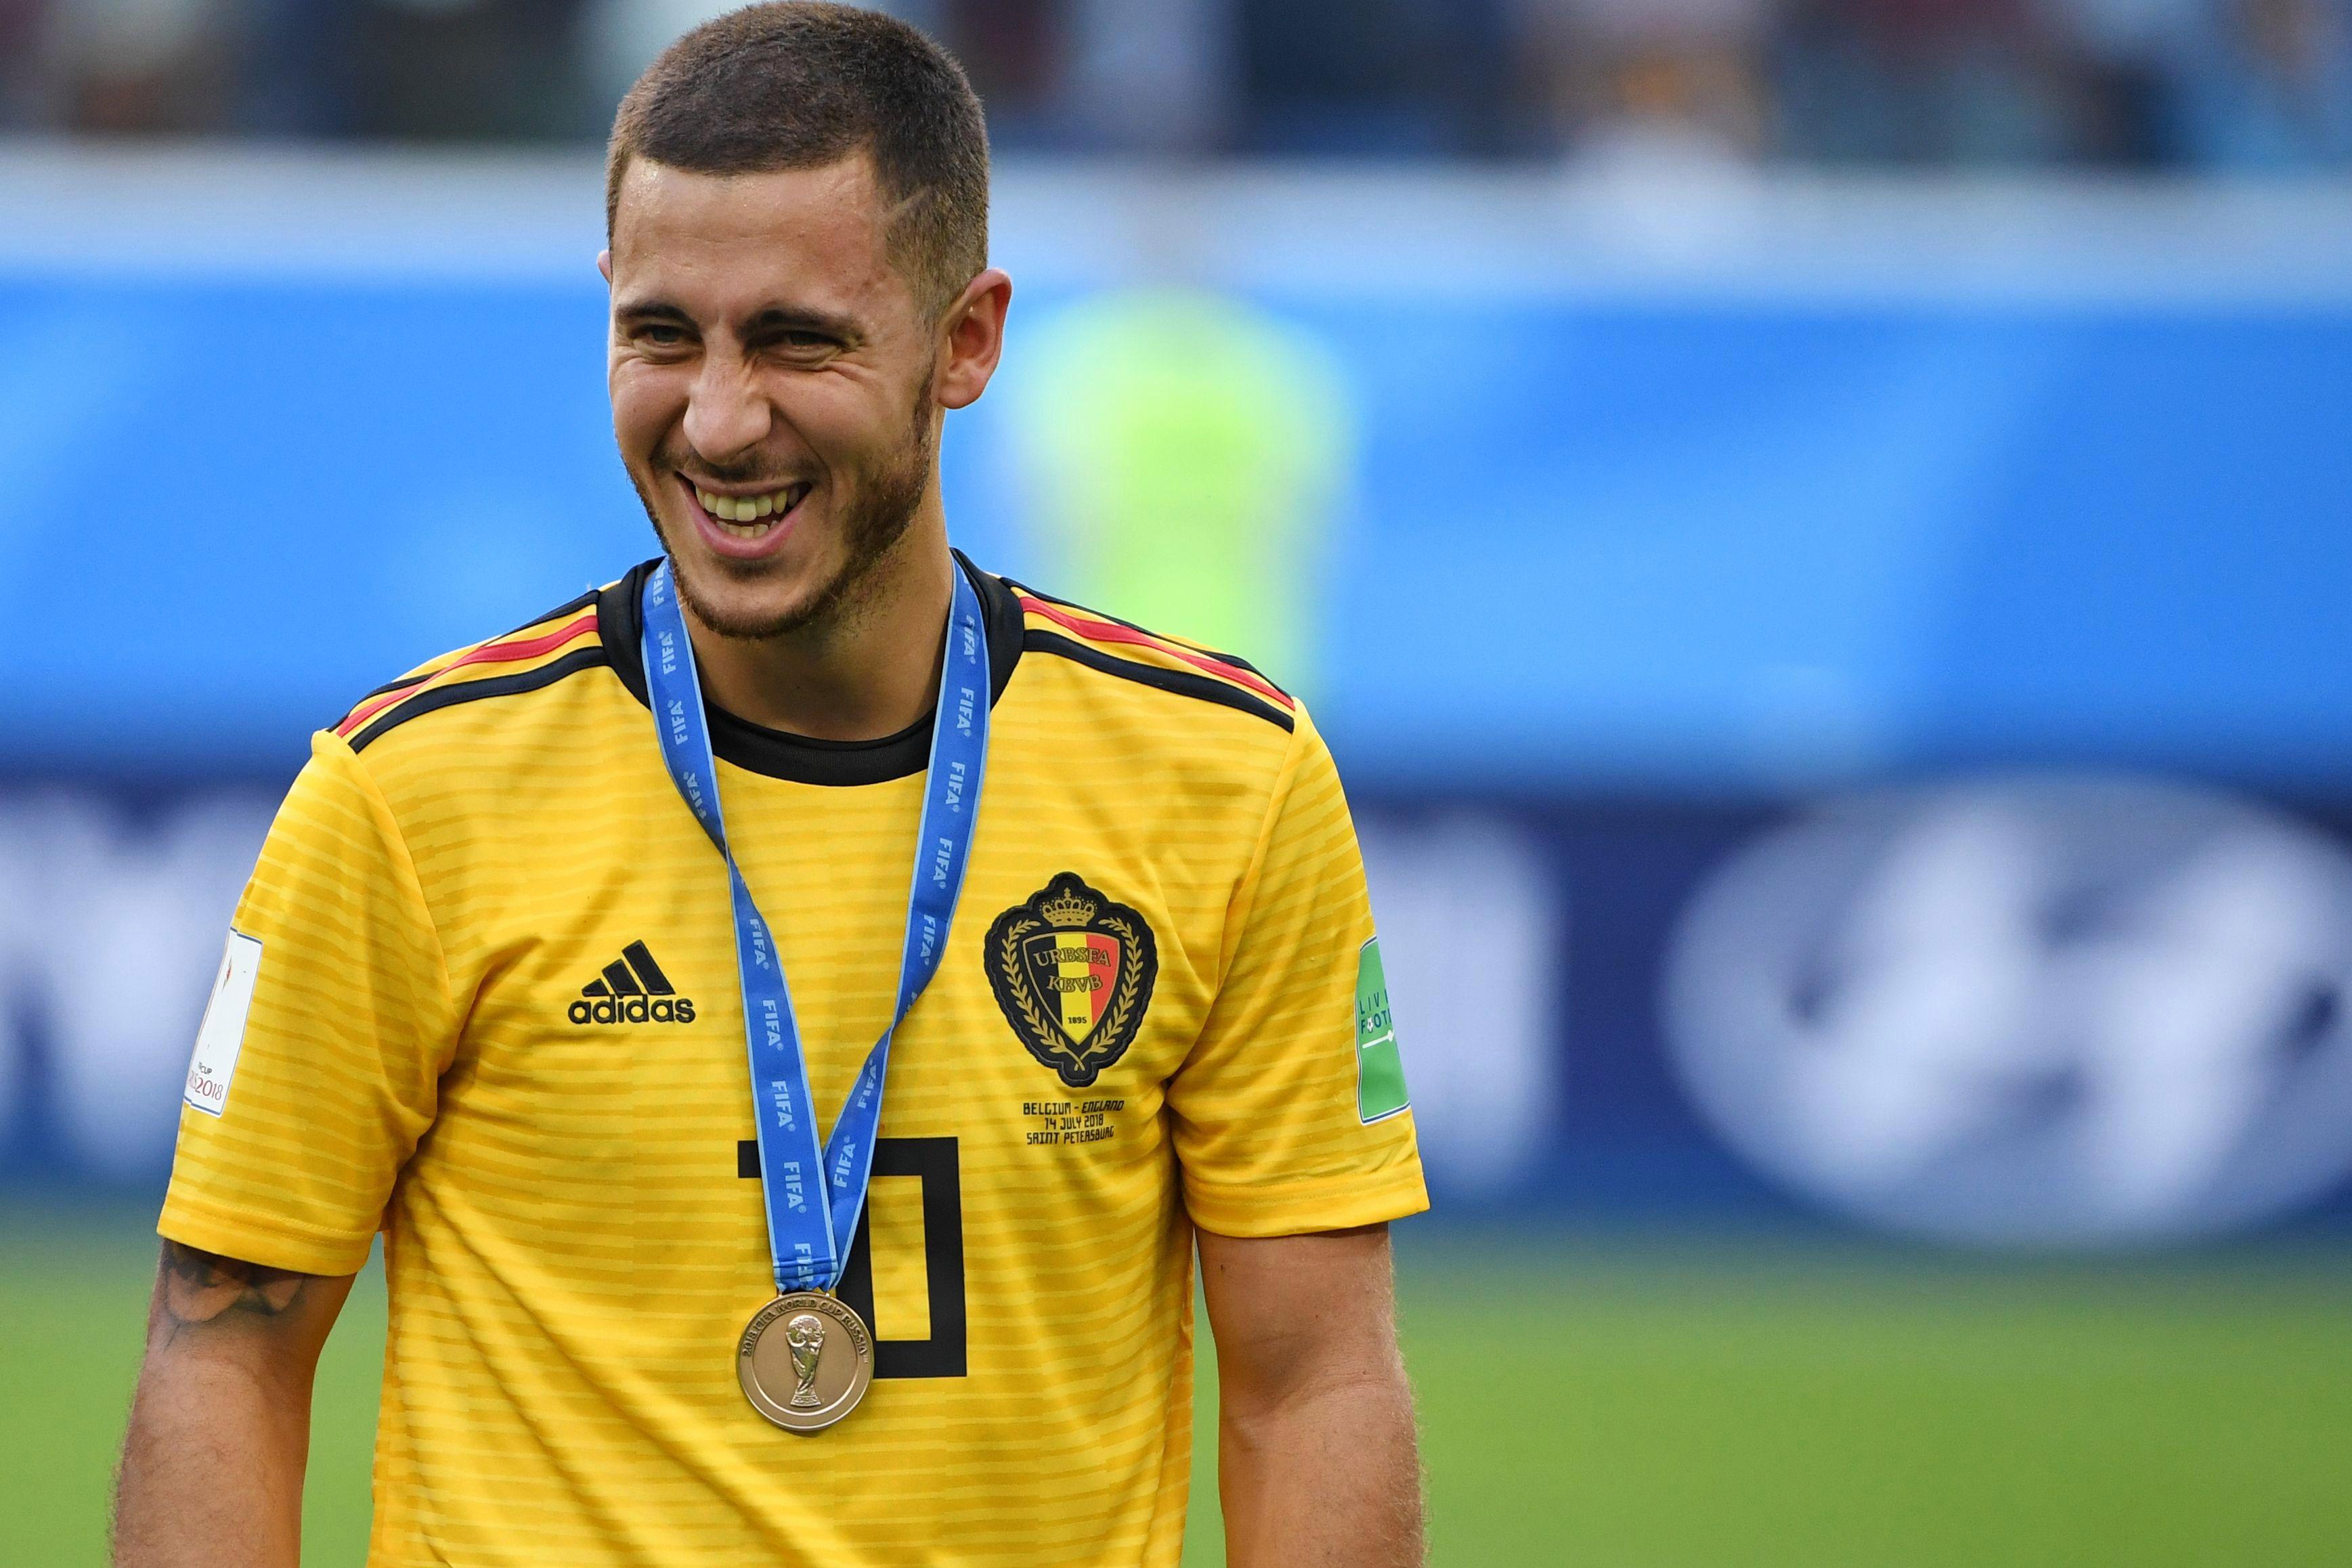 'If you leave you are dead to me' - Chelsea fans are terrified Eden Hazard could leave to join Real Madrid